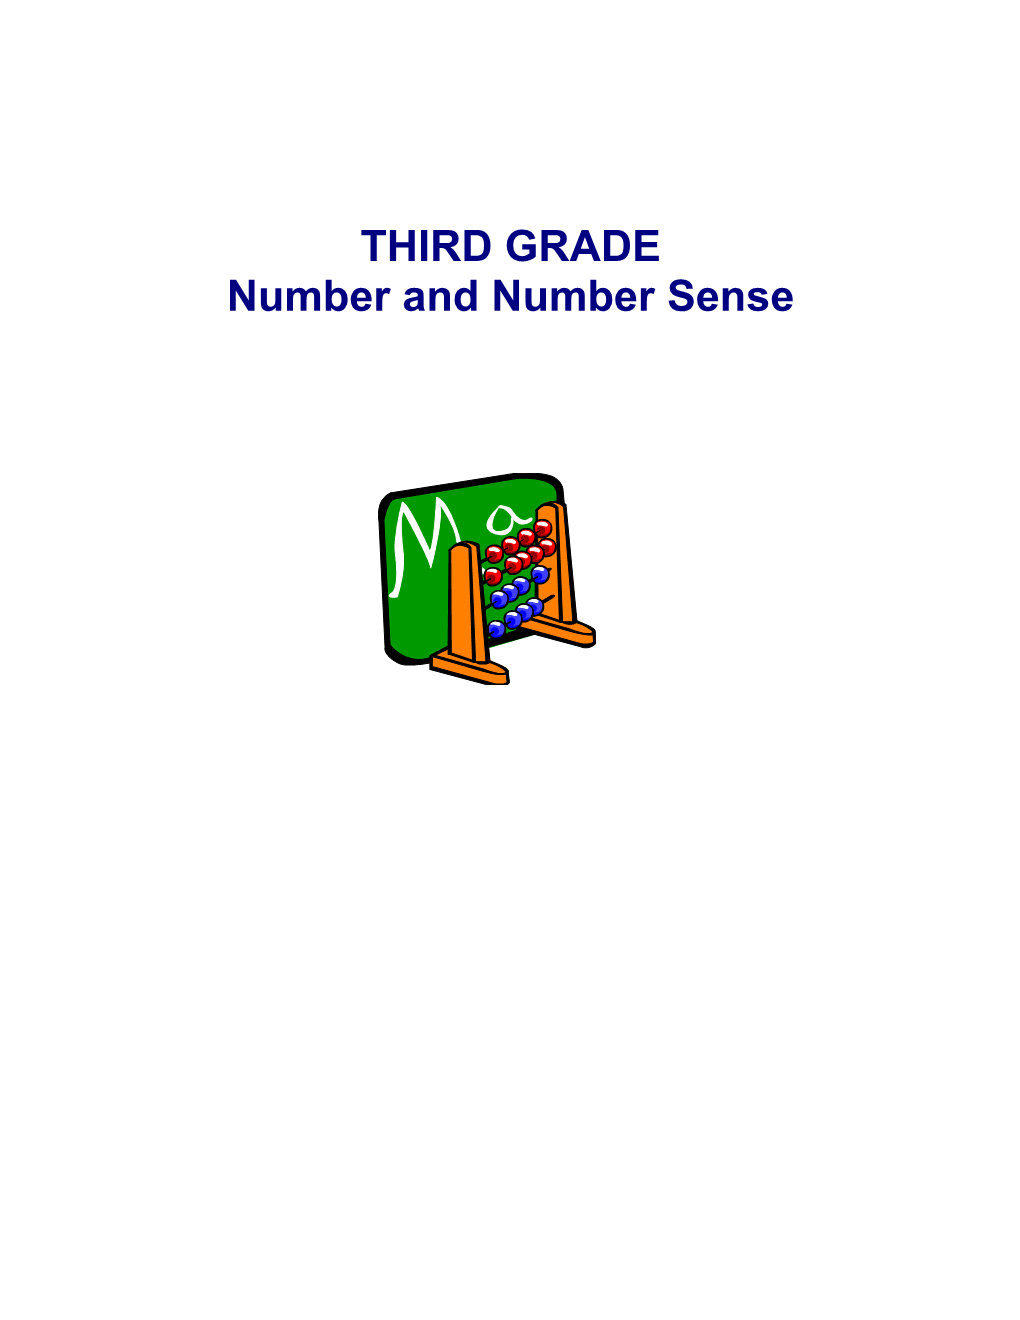 Number and Number Sense